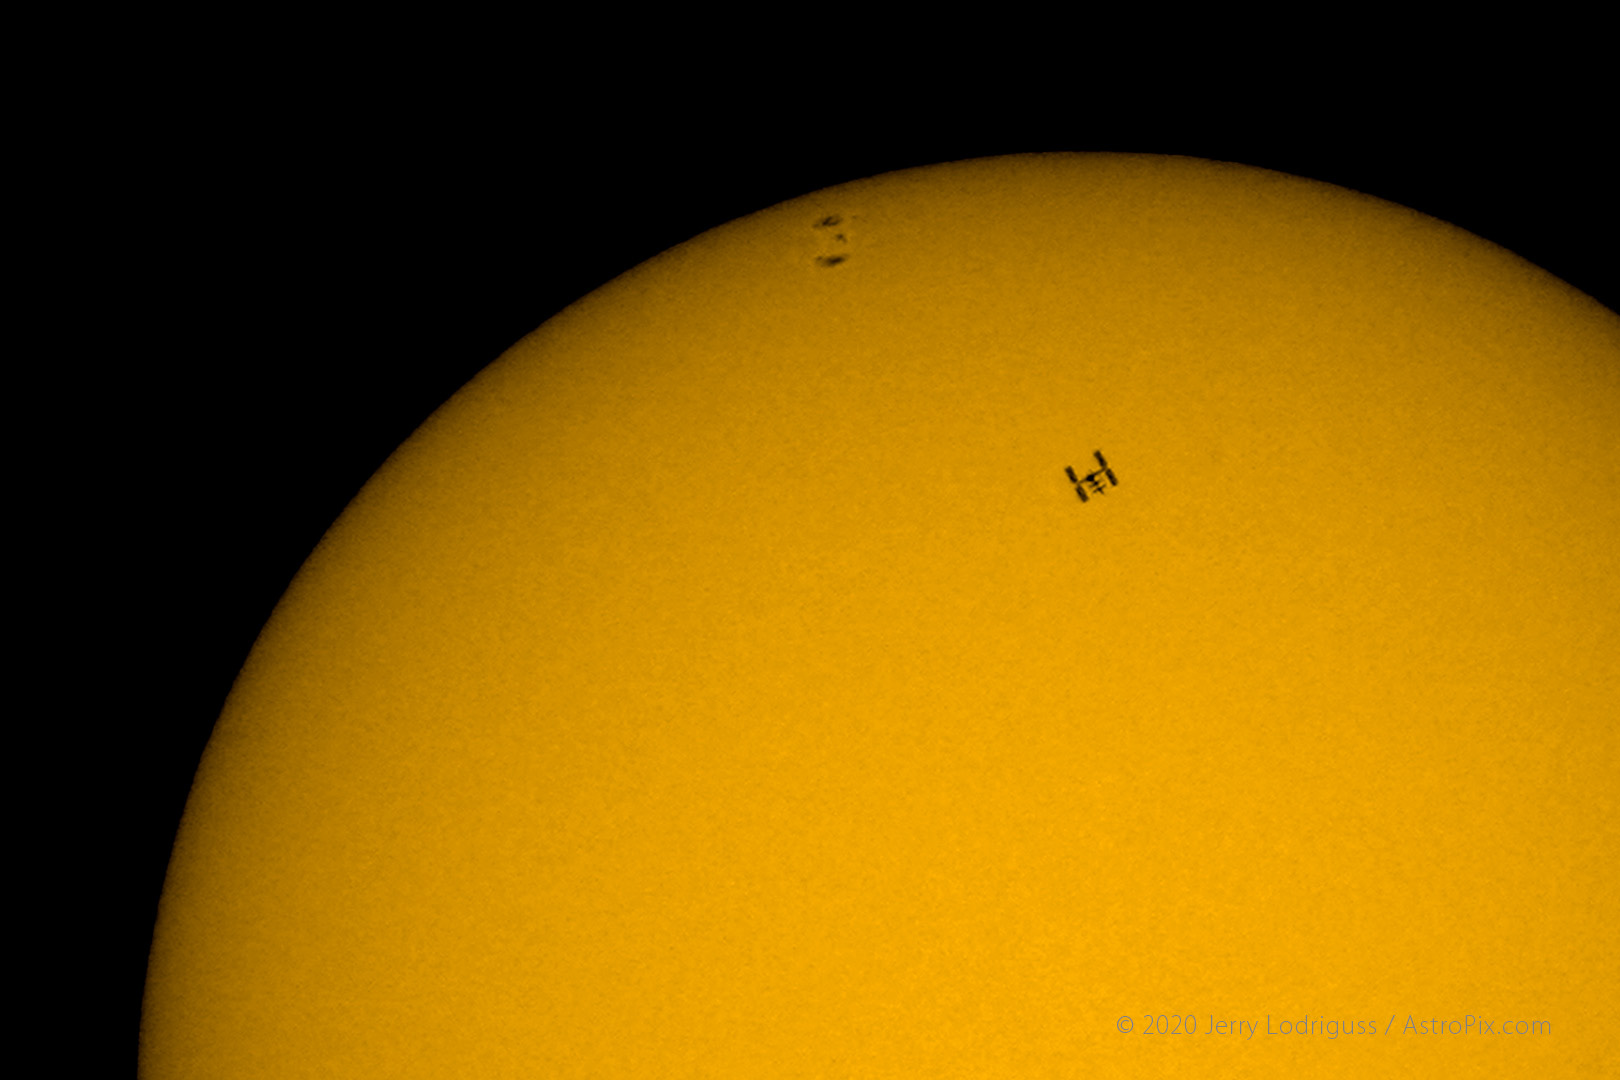 The International Space Station (ISS), with its new solar arrays, transits across the face of the Sun on July 8, 2007 at 14h 49m 54.40s EDT Sunspot group 963 is also visible on the eastern limb of the Sun, just rotating on.